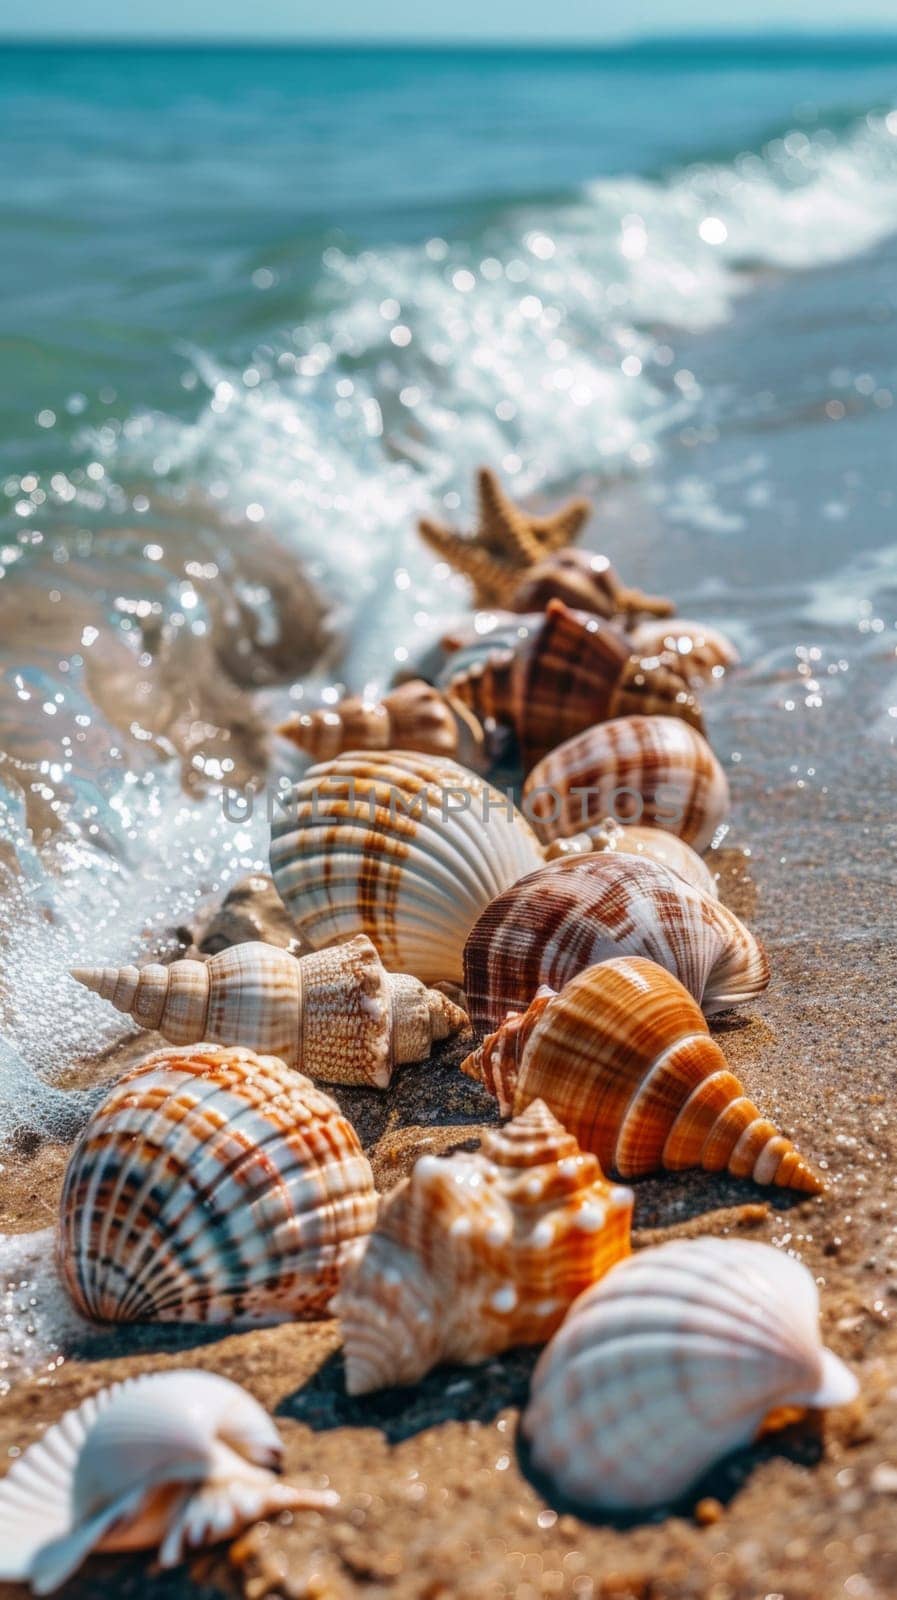 A group of shells are lined up on the beach